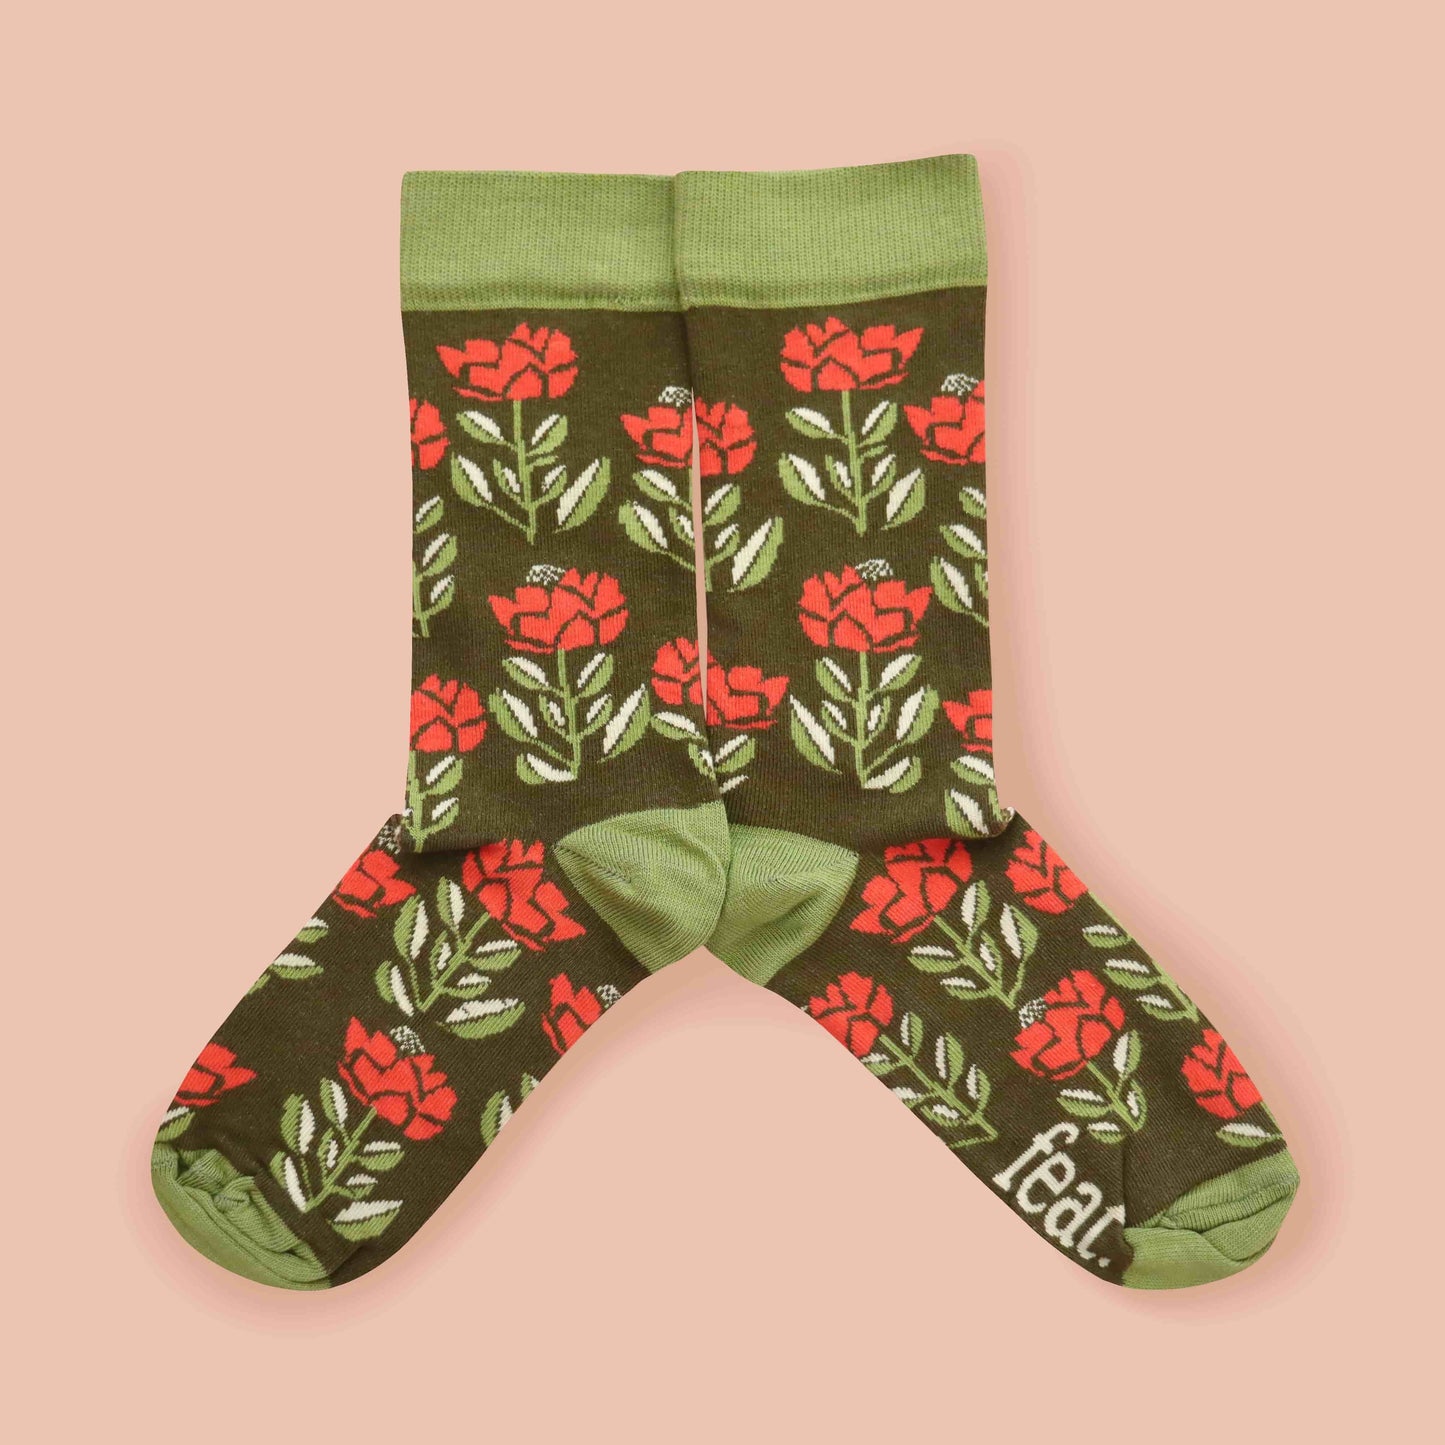 Protea socks pink background mirrored